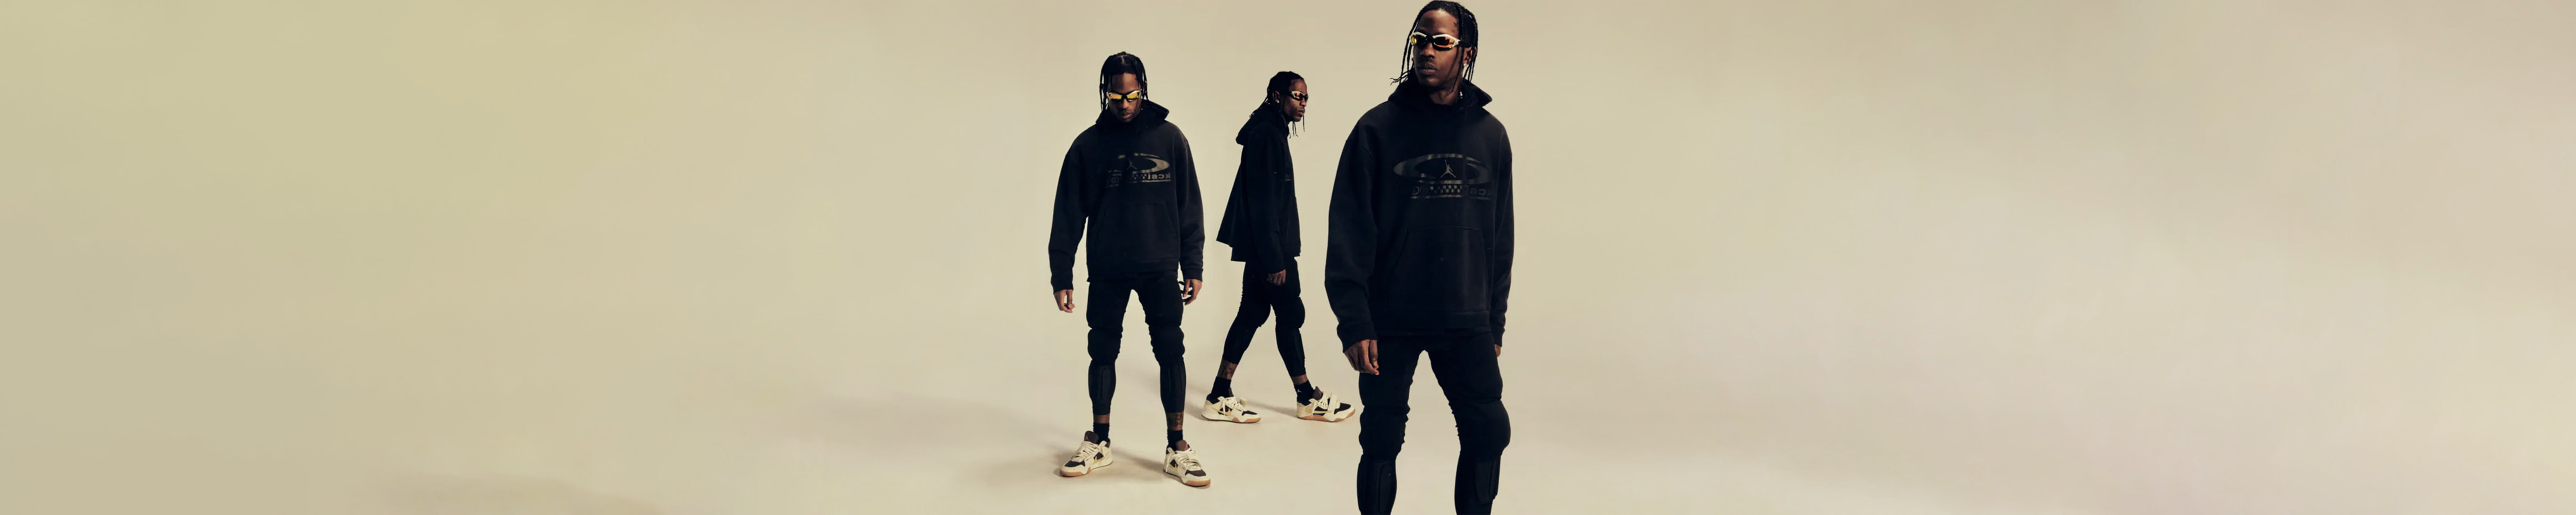 Travis Scott and Jordan Brand Reconnect for a New Apparel Collection